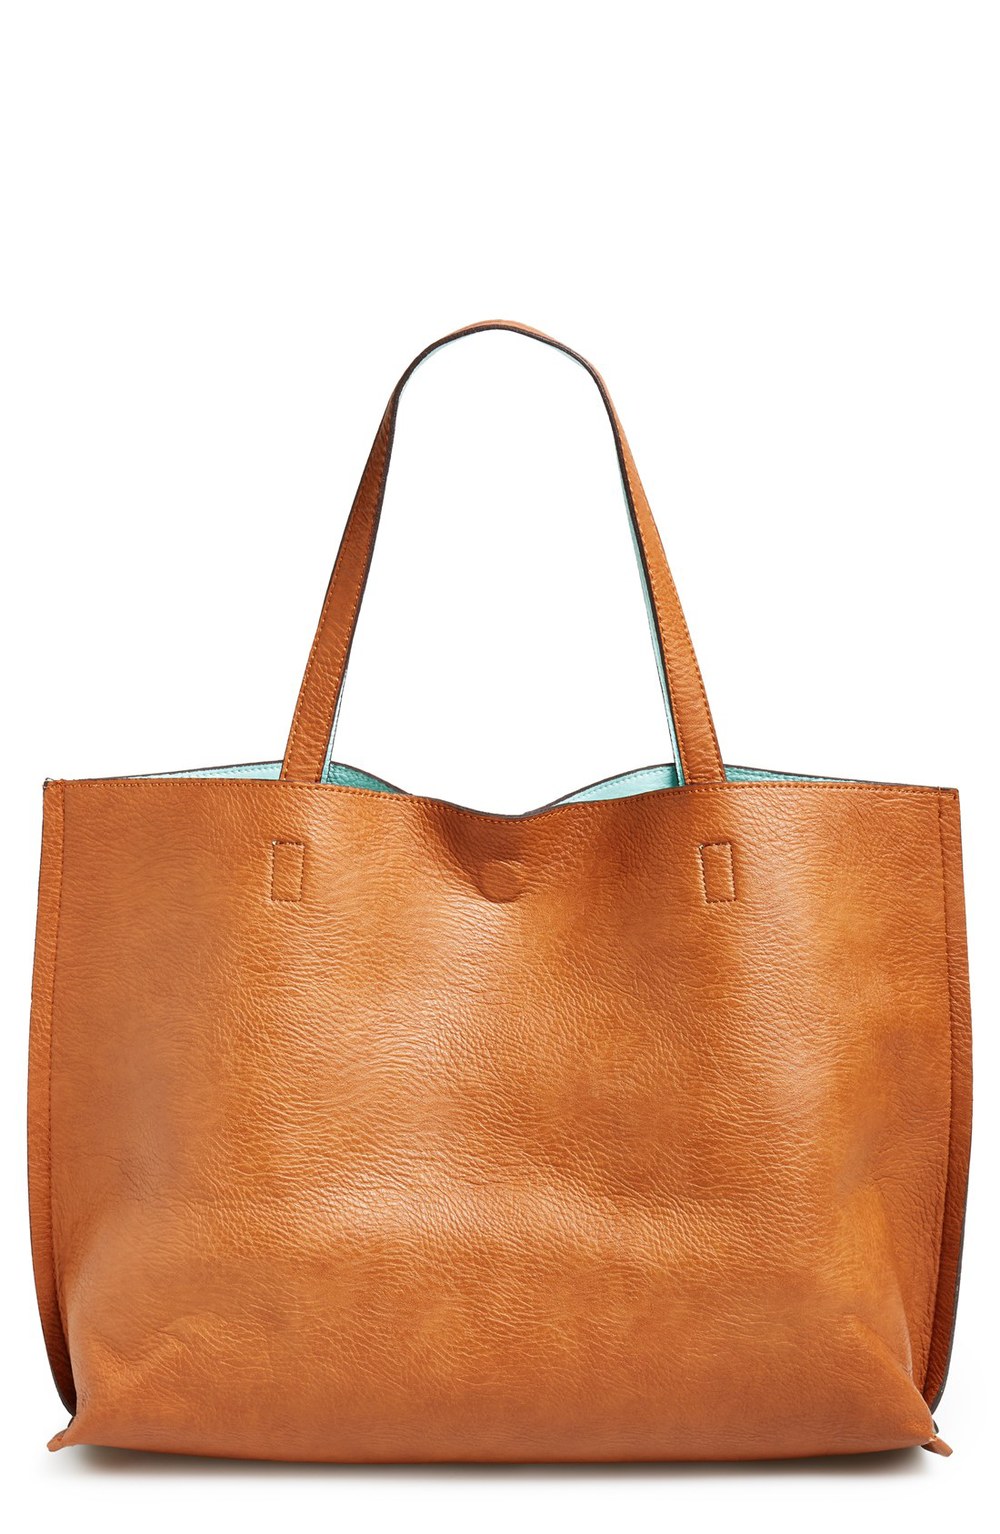 Perfect tote for travel, School or Work — WHATSINTODAY